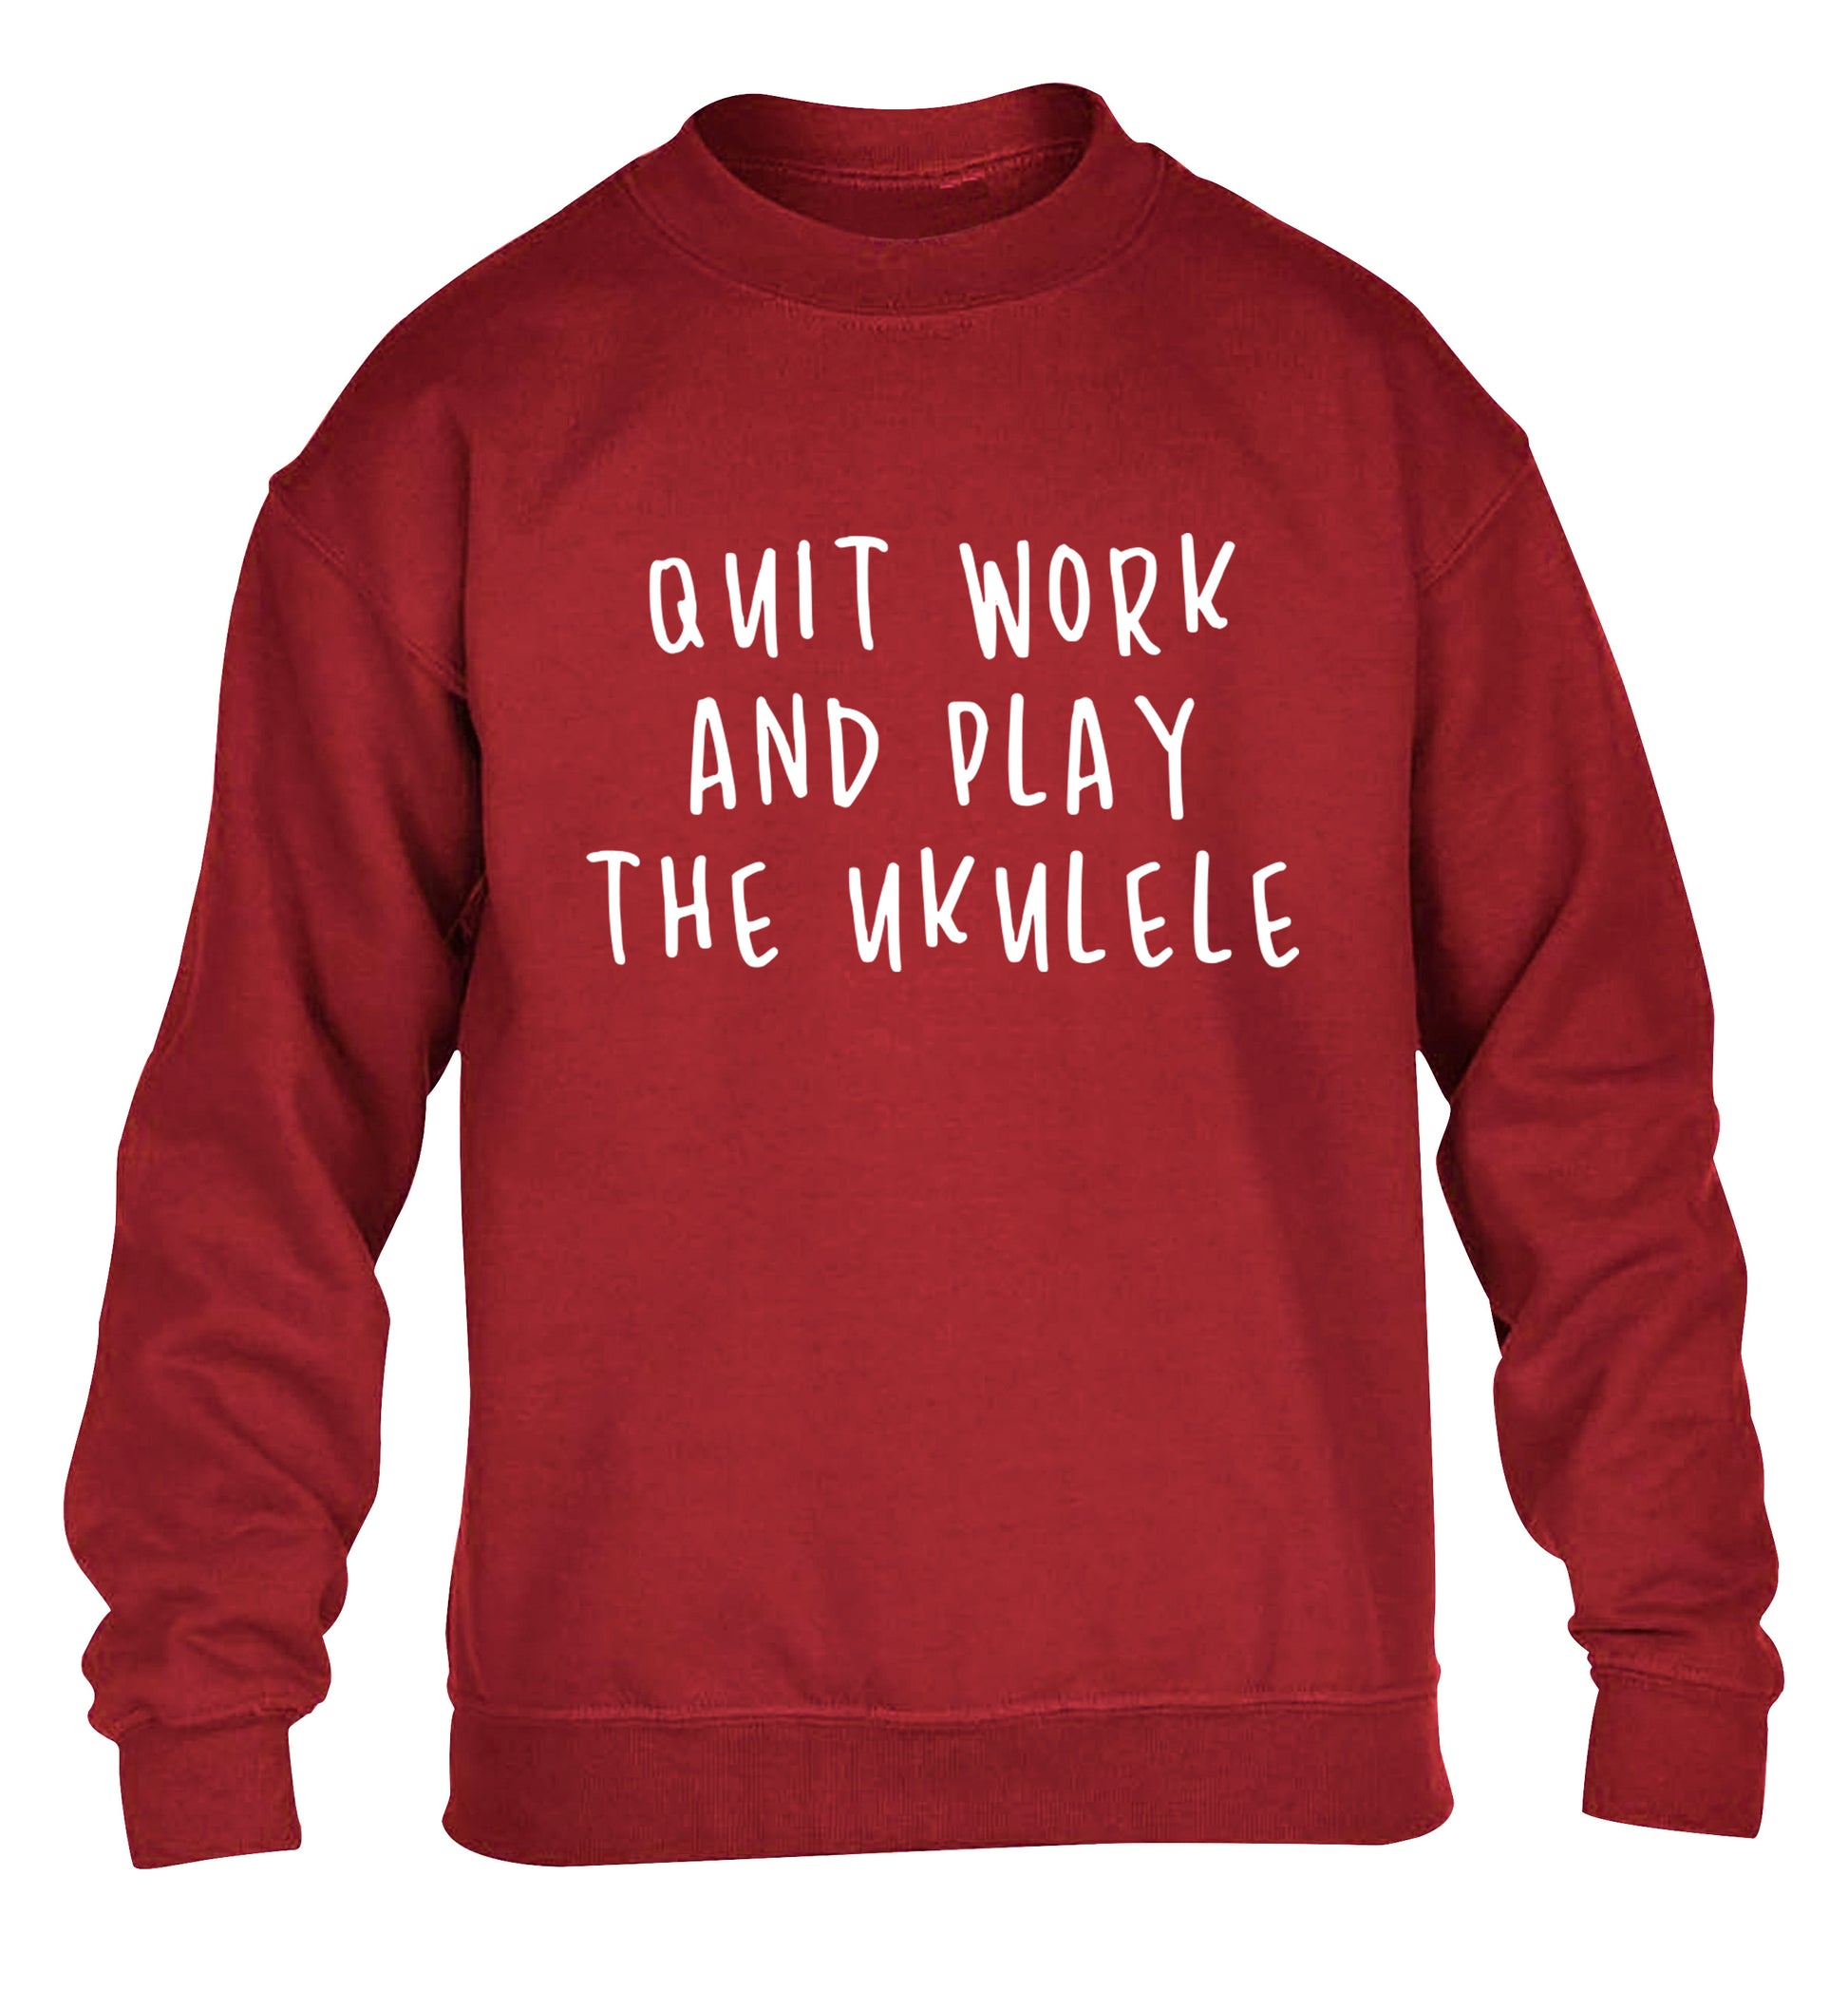 Quit work and play the ukulele children's grey sweater 12-14 Years